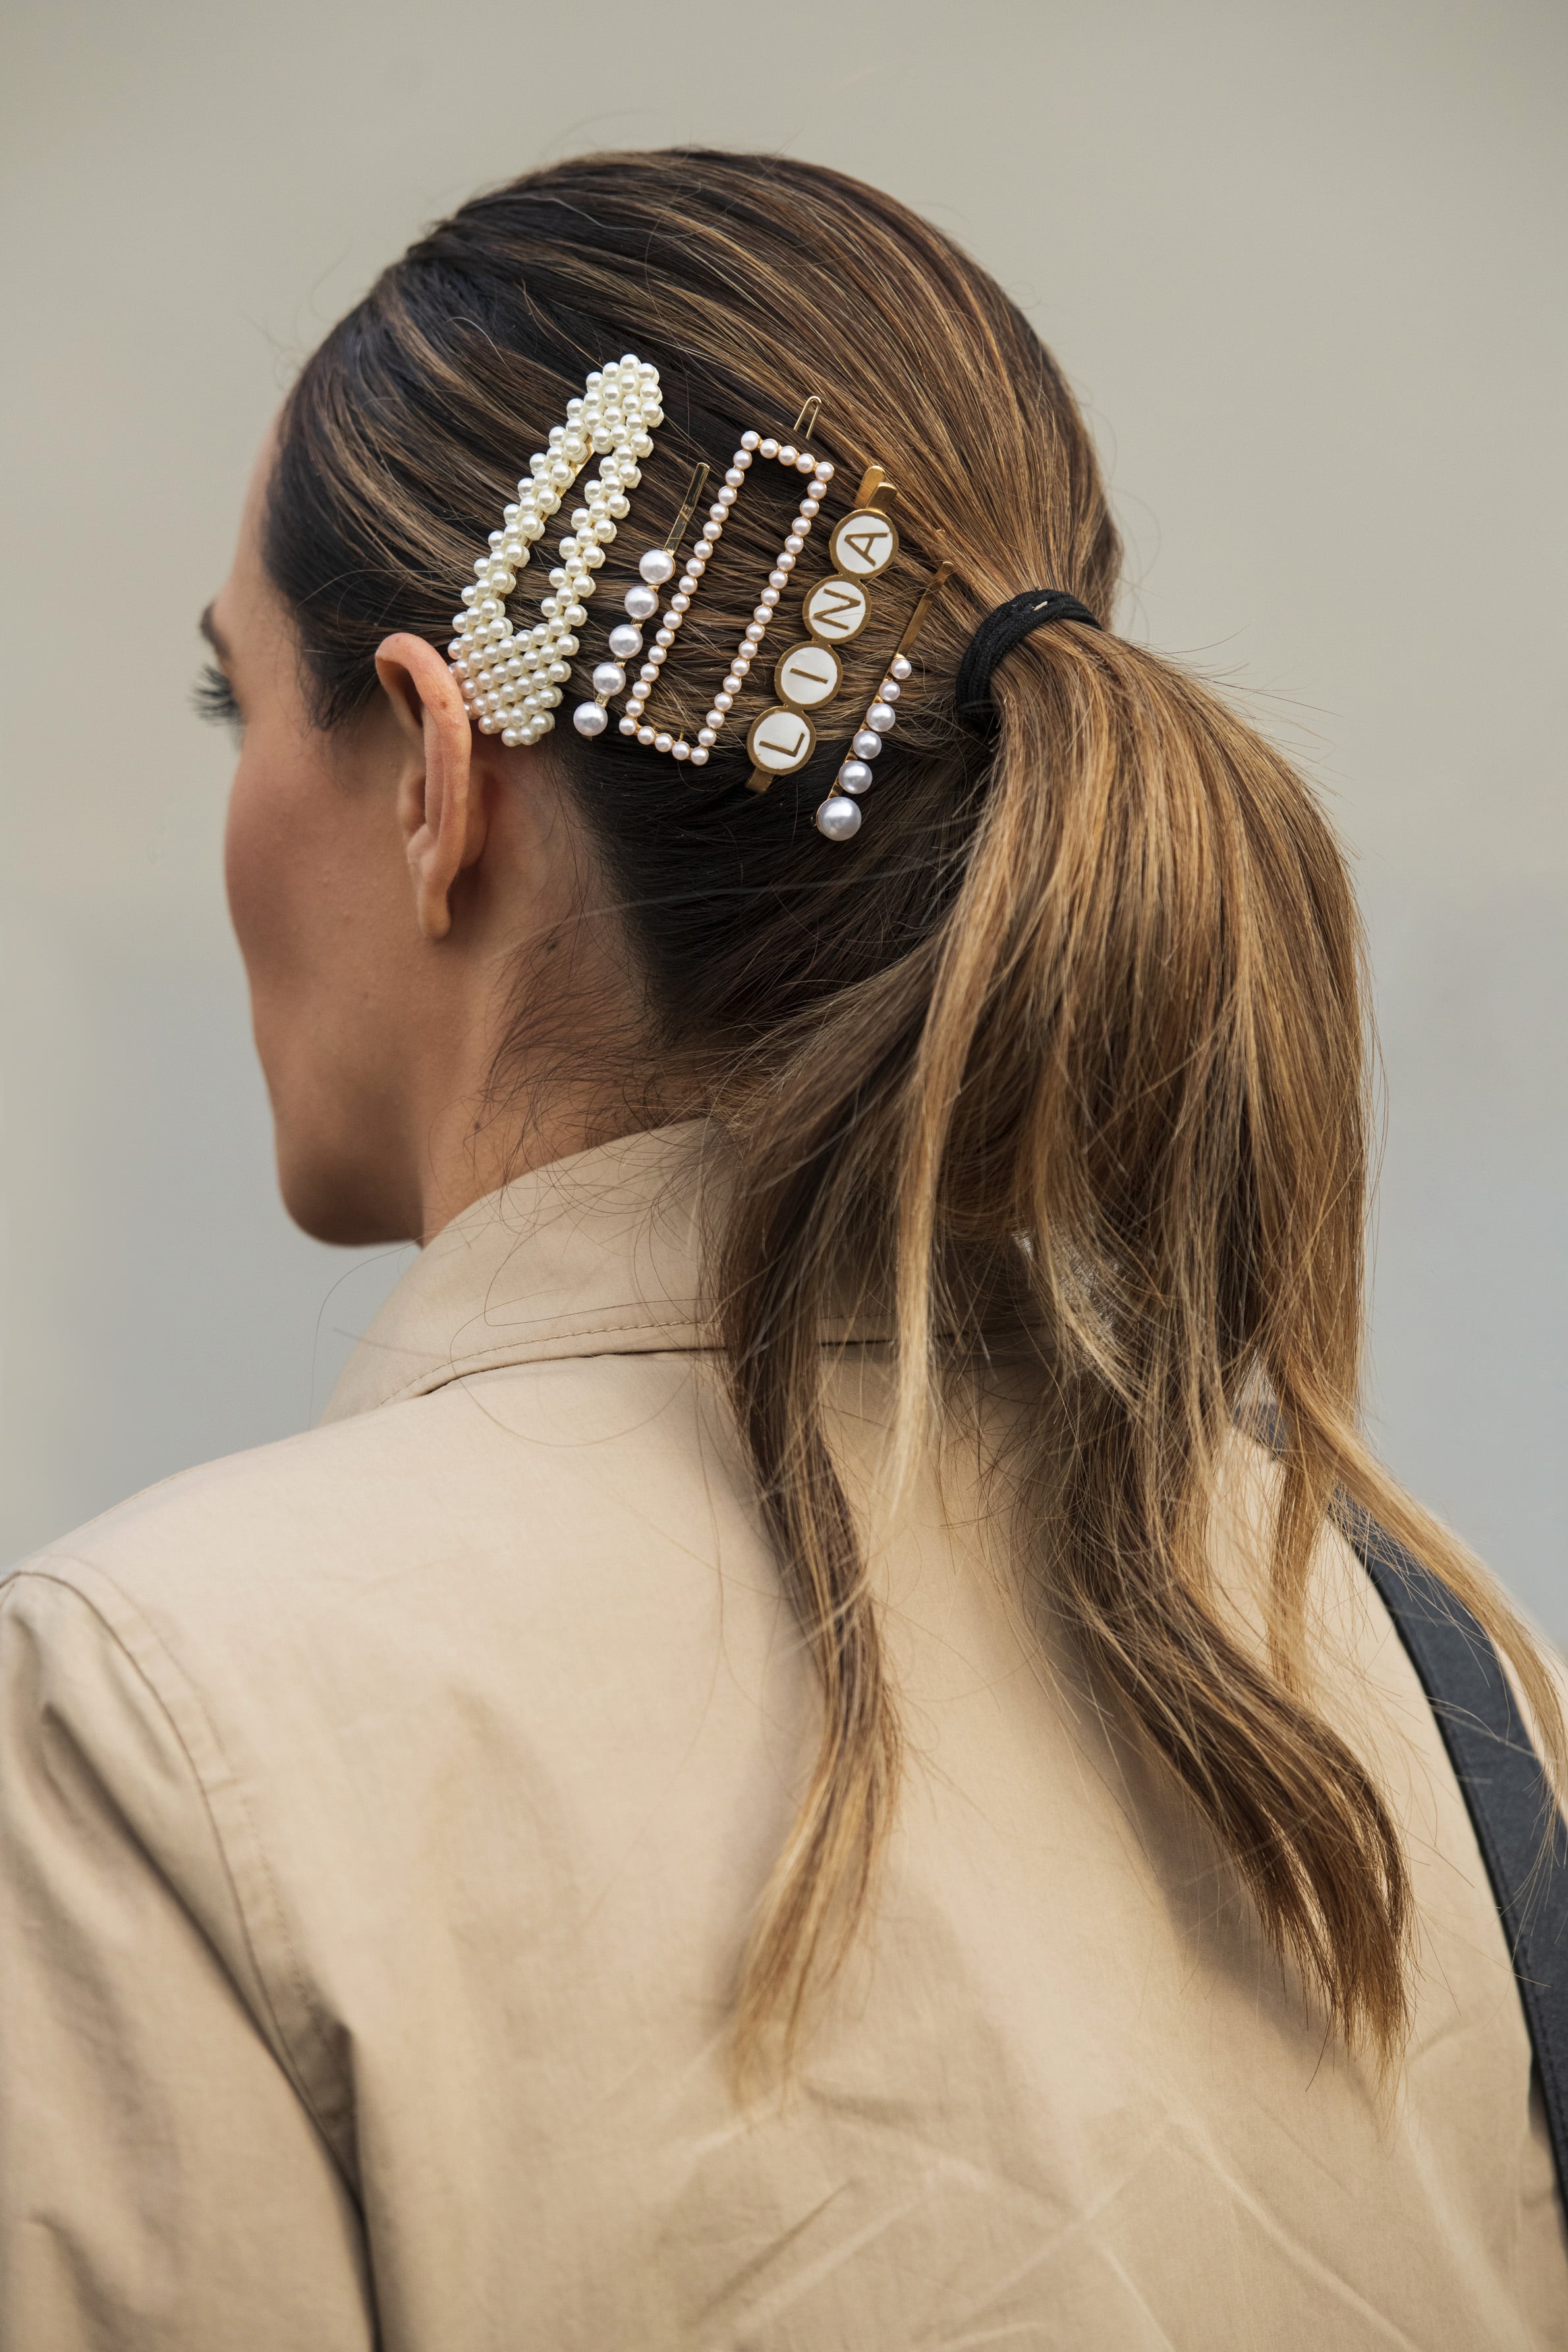 The skinny headband is the ultimate hair accessory to wear this